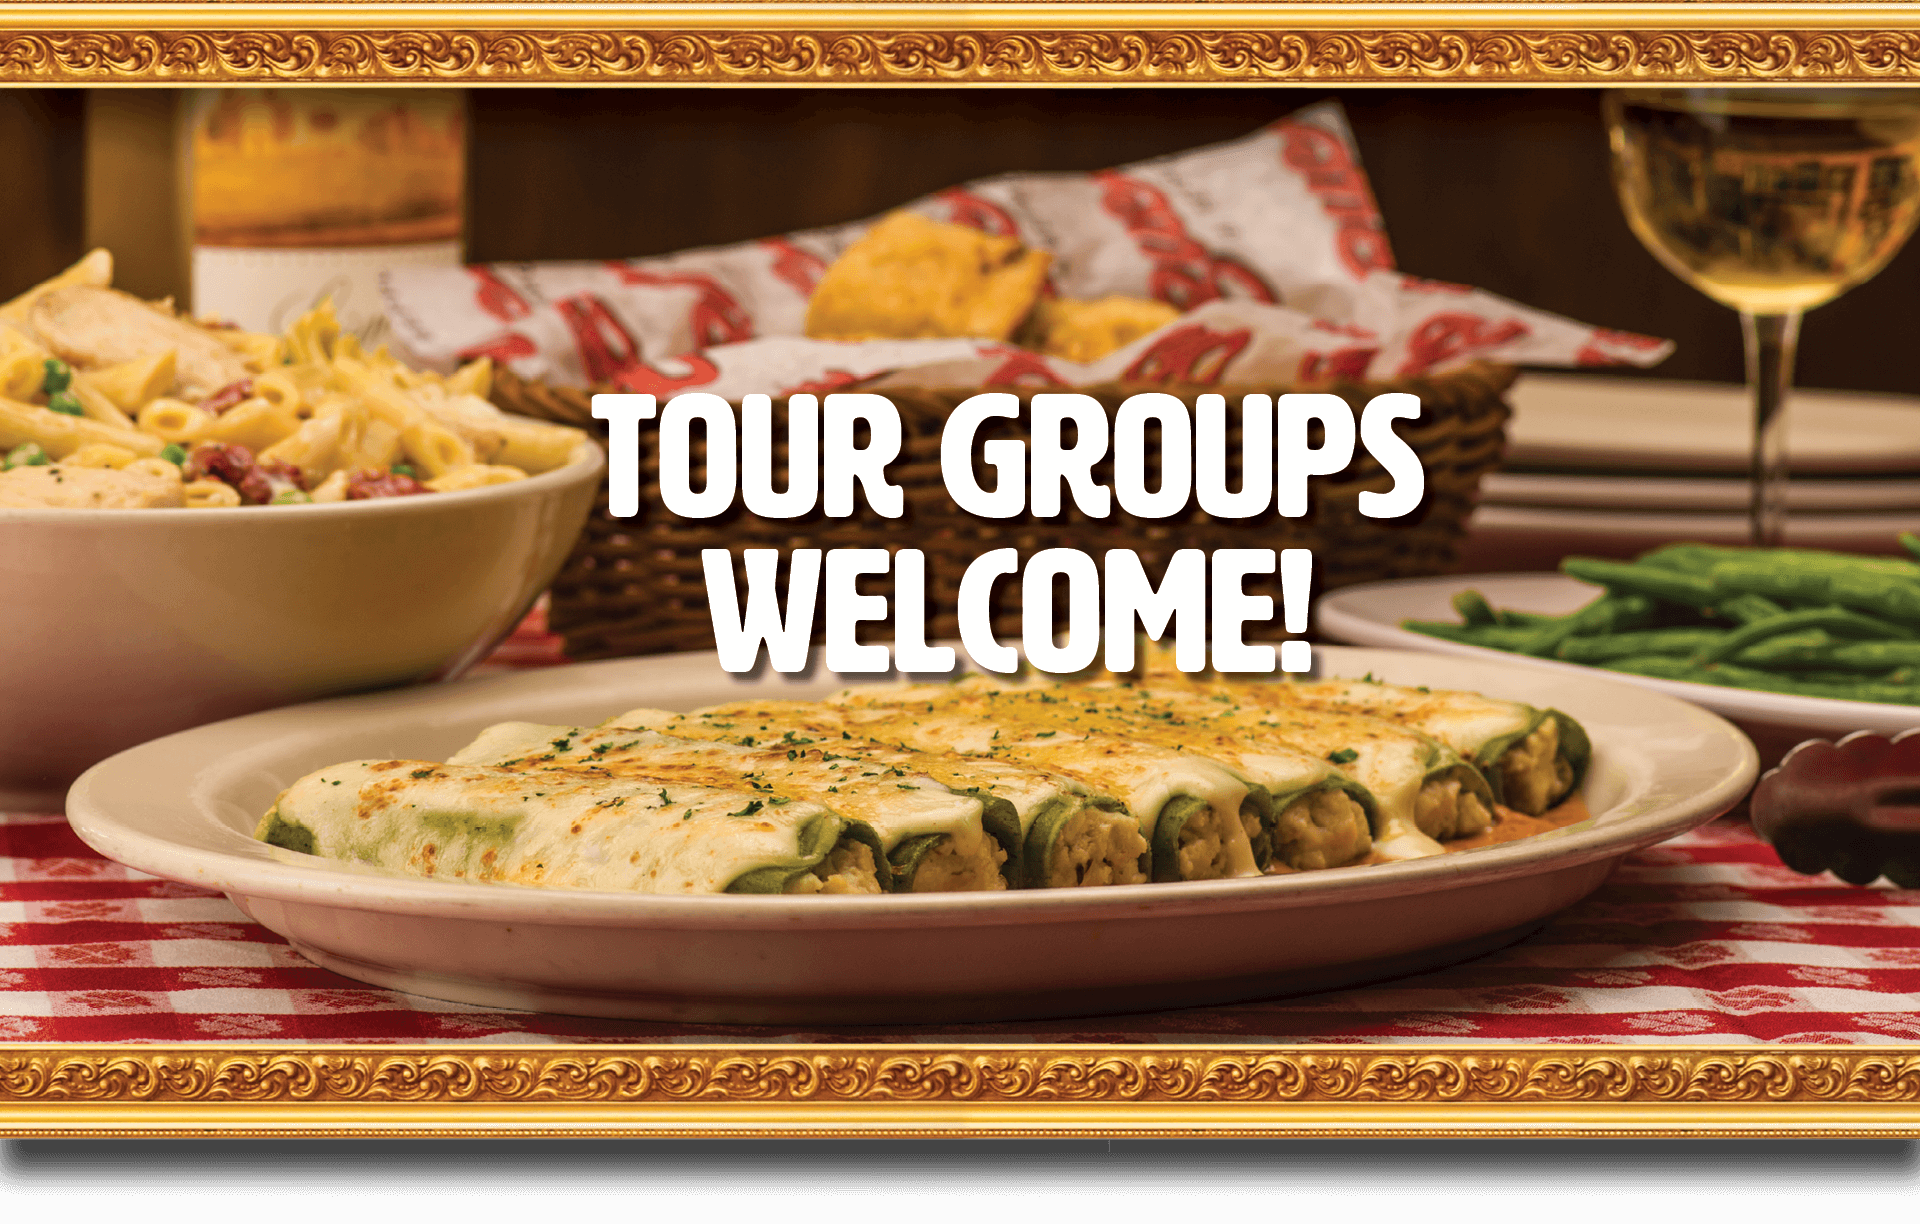 Tour groups are welcome at Buca di Beppo.